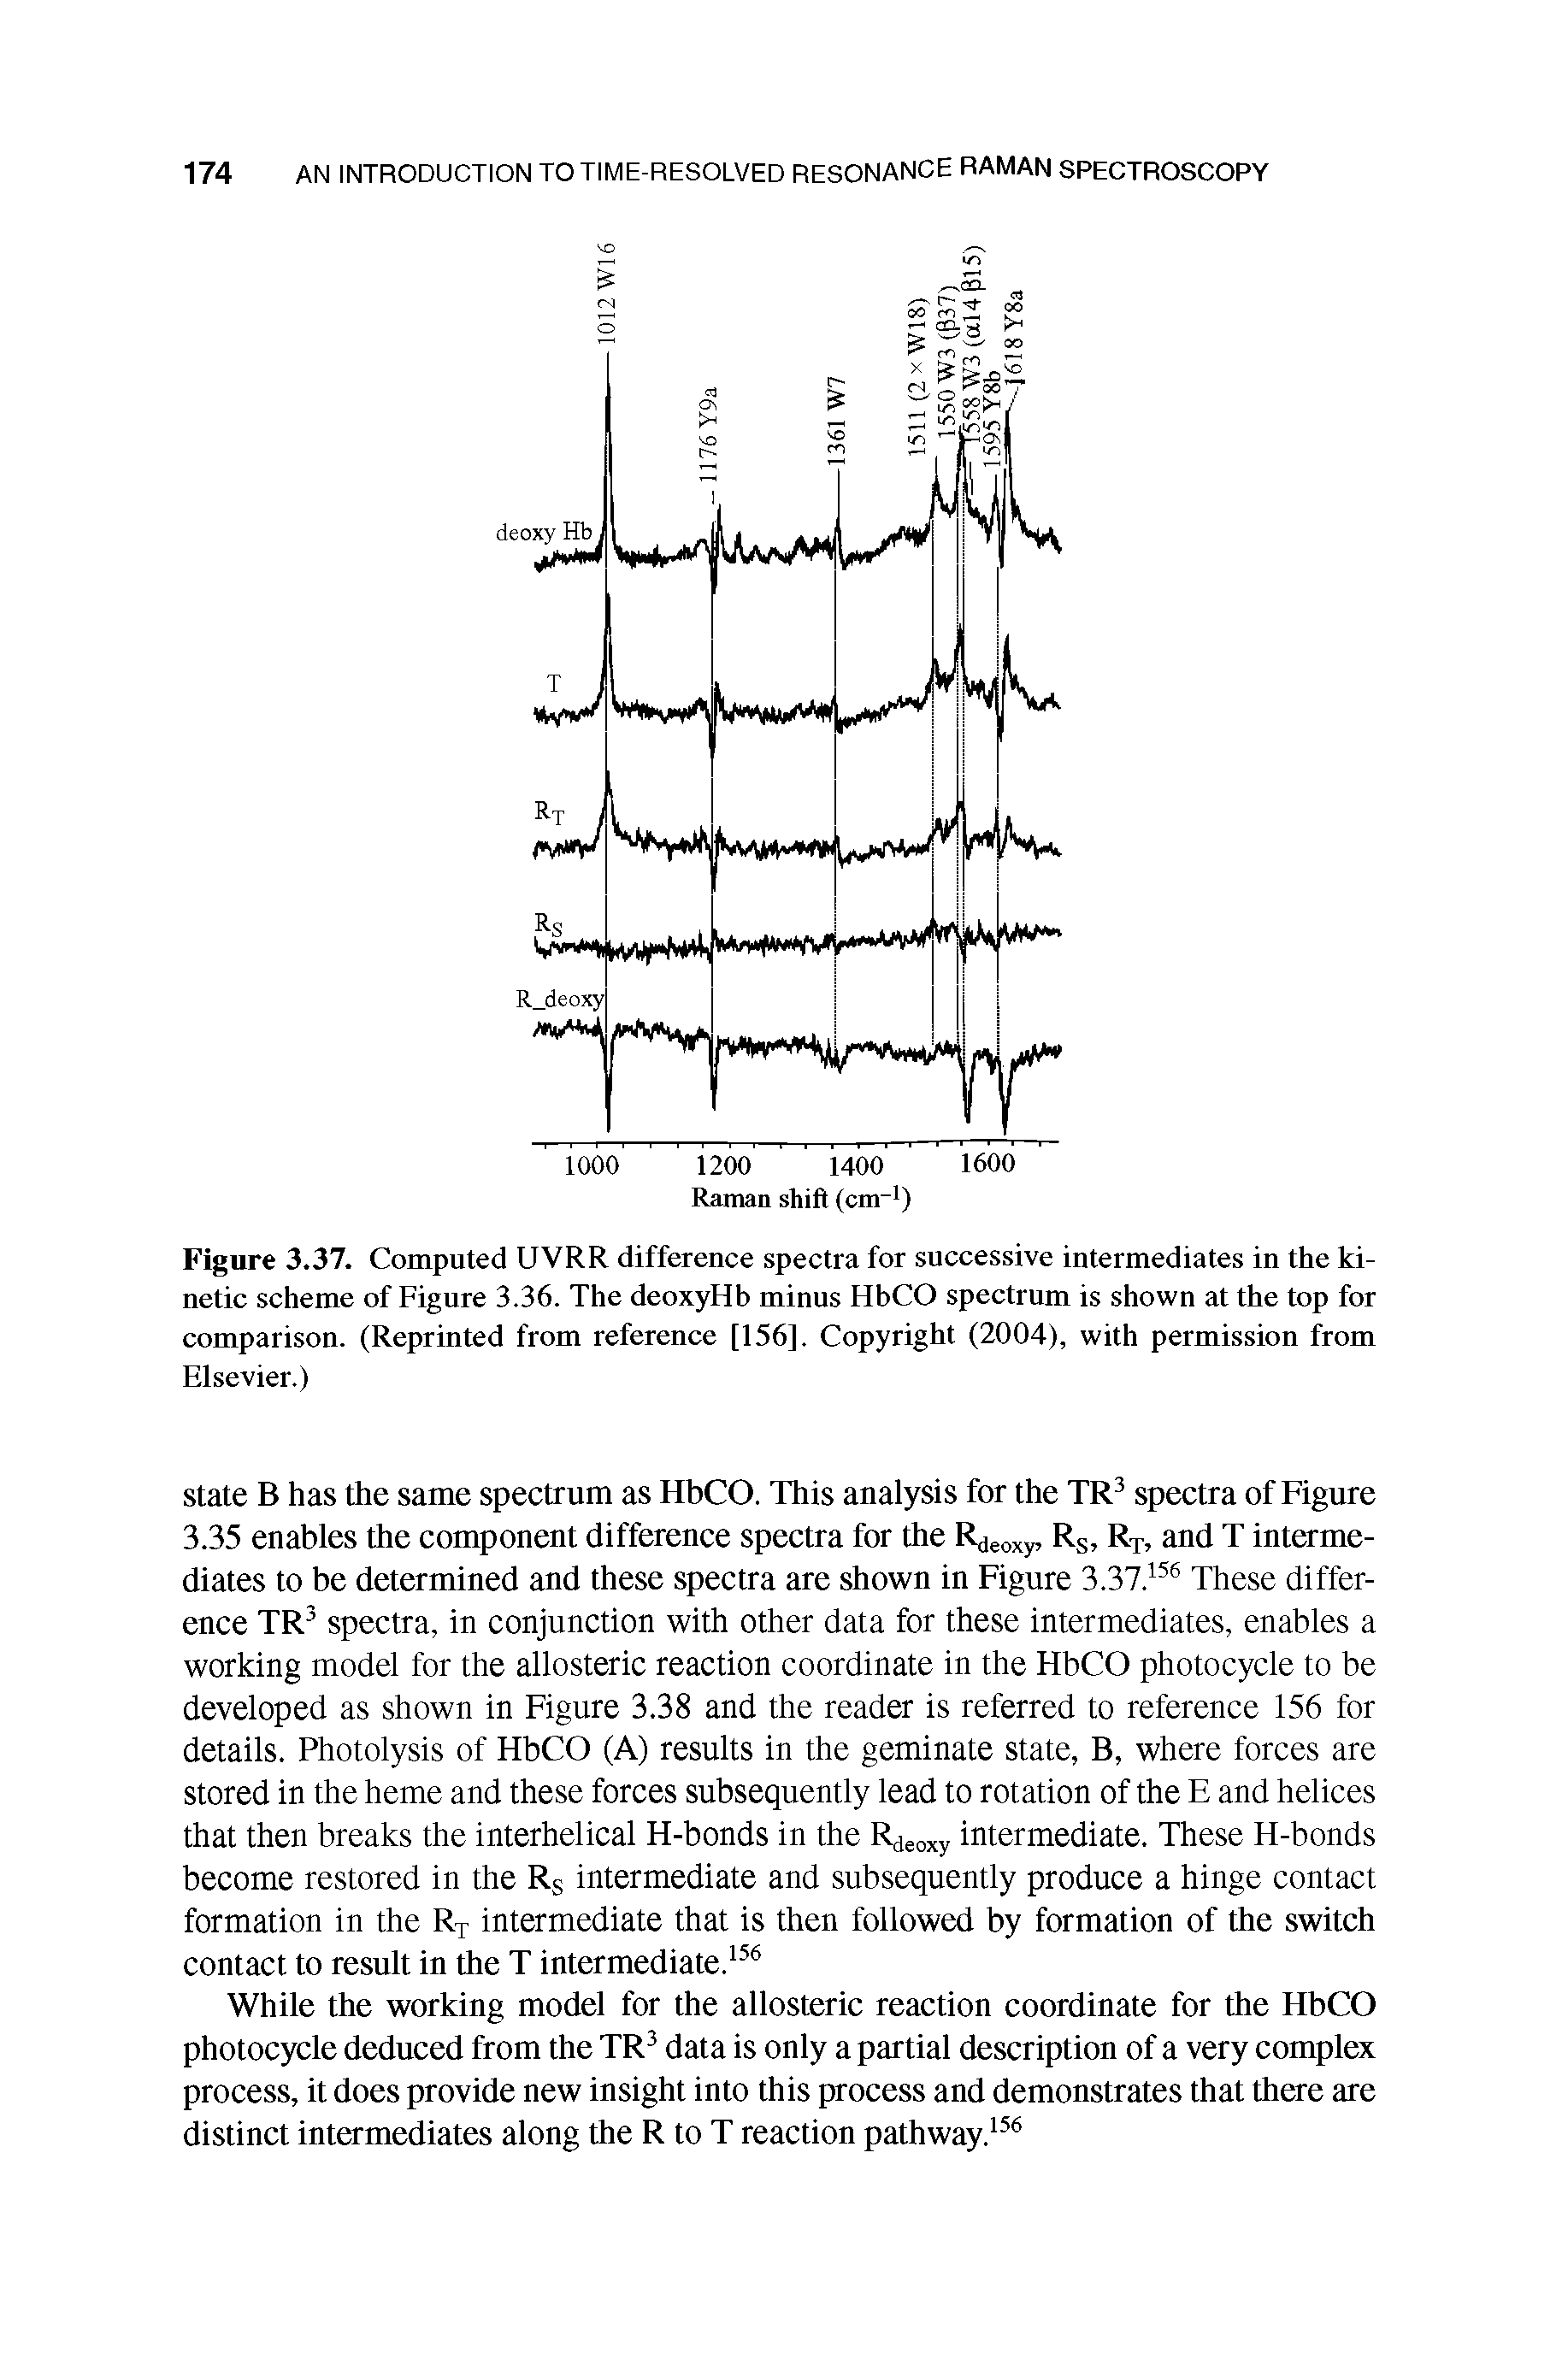 Figure 3.37. Computed UVRR difference spectra for successive intermediates in the kinetic scheme of Figure 3.36. The deoxyHb minus ffbCO spectrum is shown at the top for comparison. (Reprinted from reference [156]. Copyright (2004), with permission from Elsevier.)...